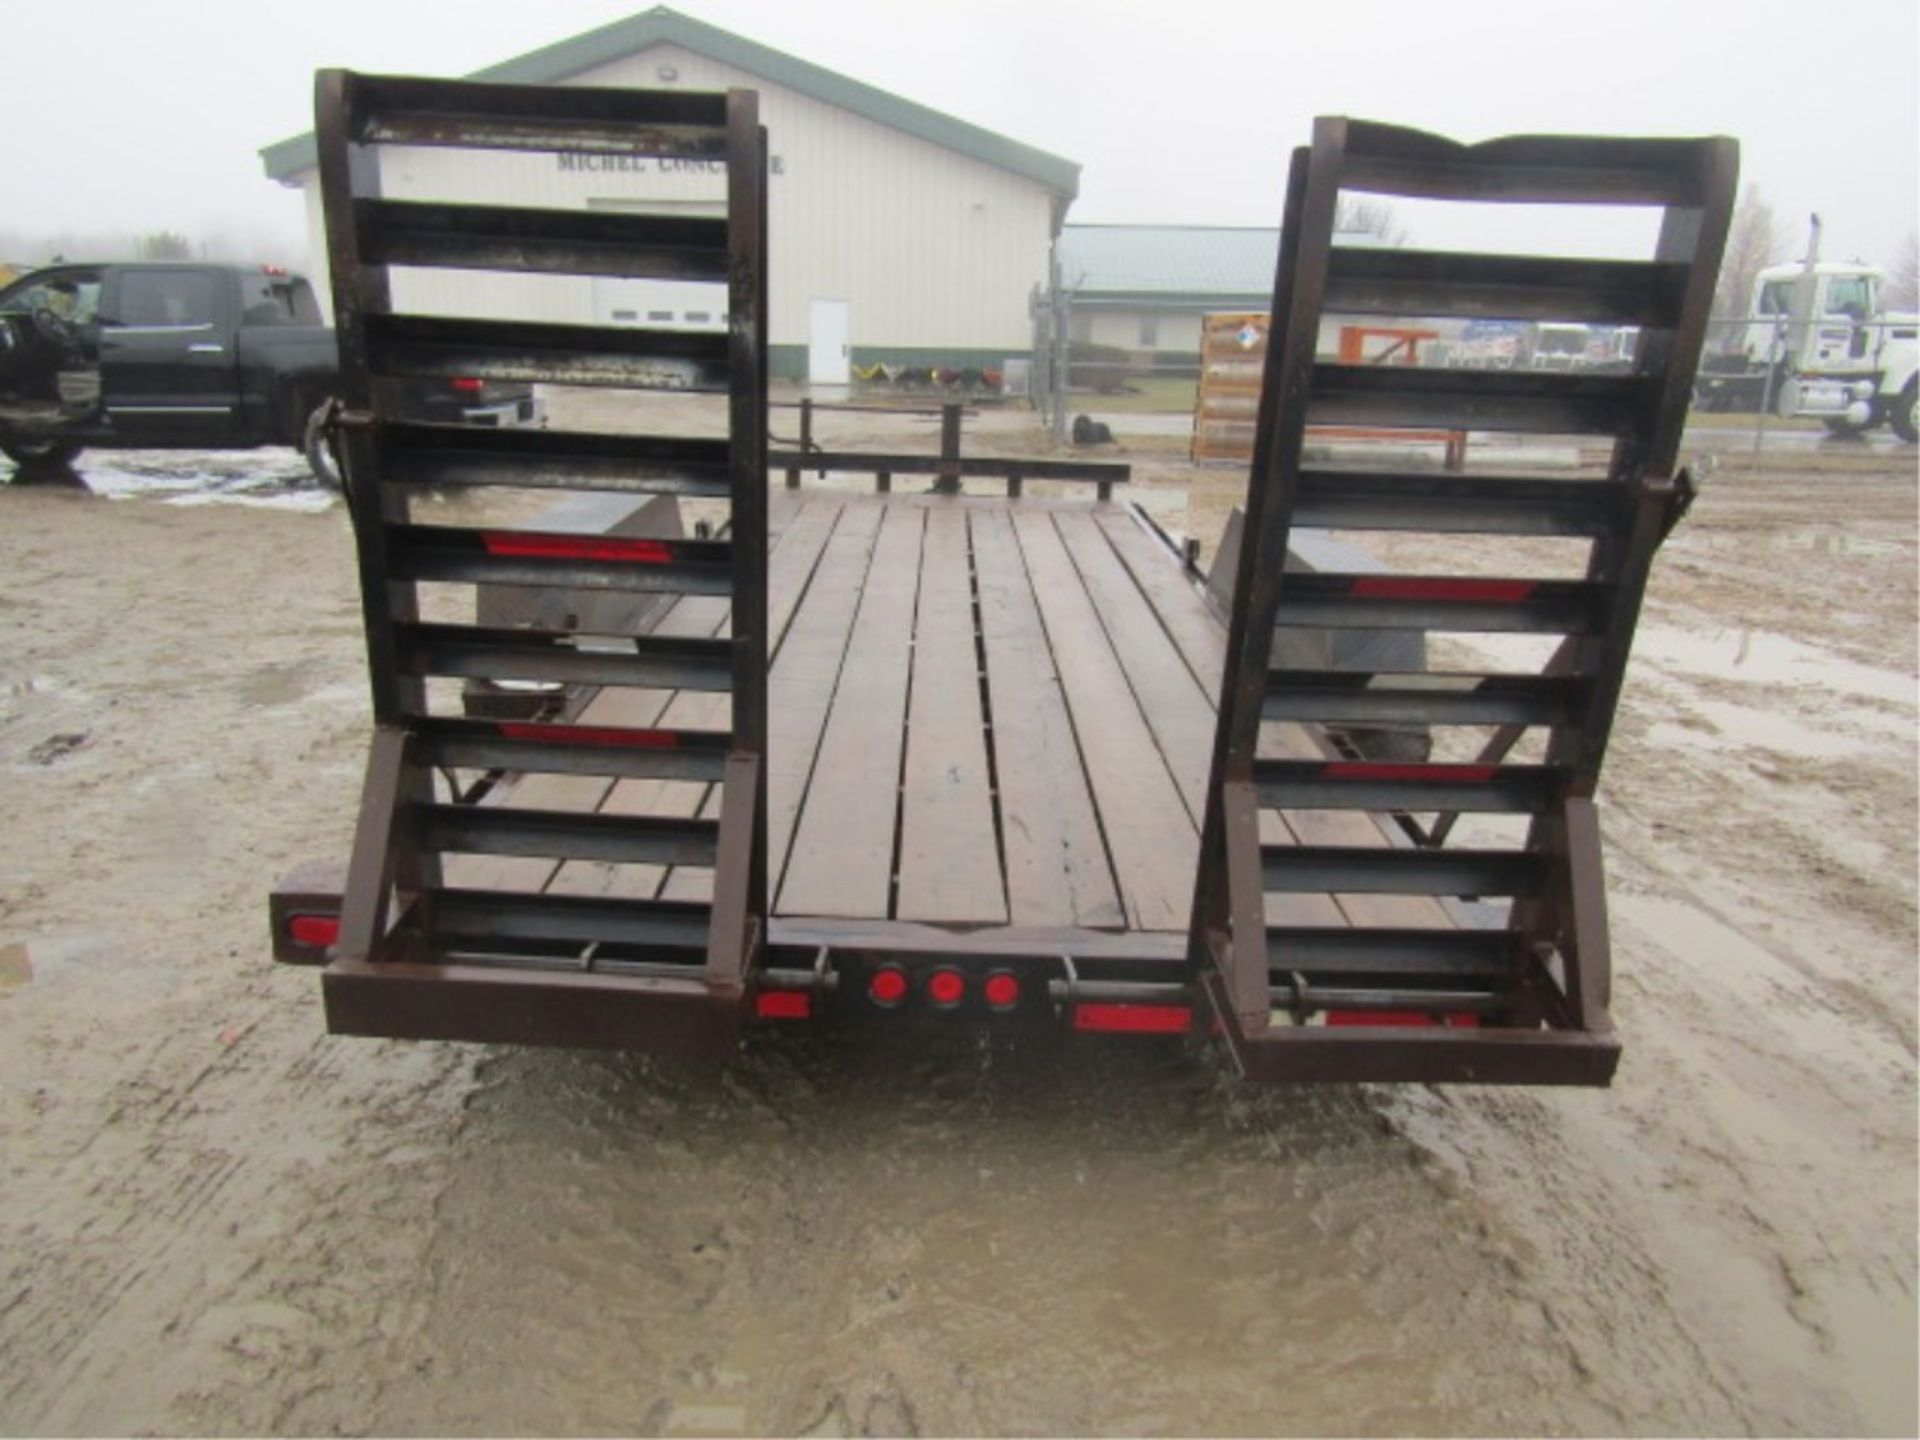 '99 Trotter Flatbed Trailer w/Ramps, Vin#082699, 80' x 18', additional $25.00 title fee - Image 7 of 9